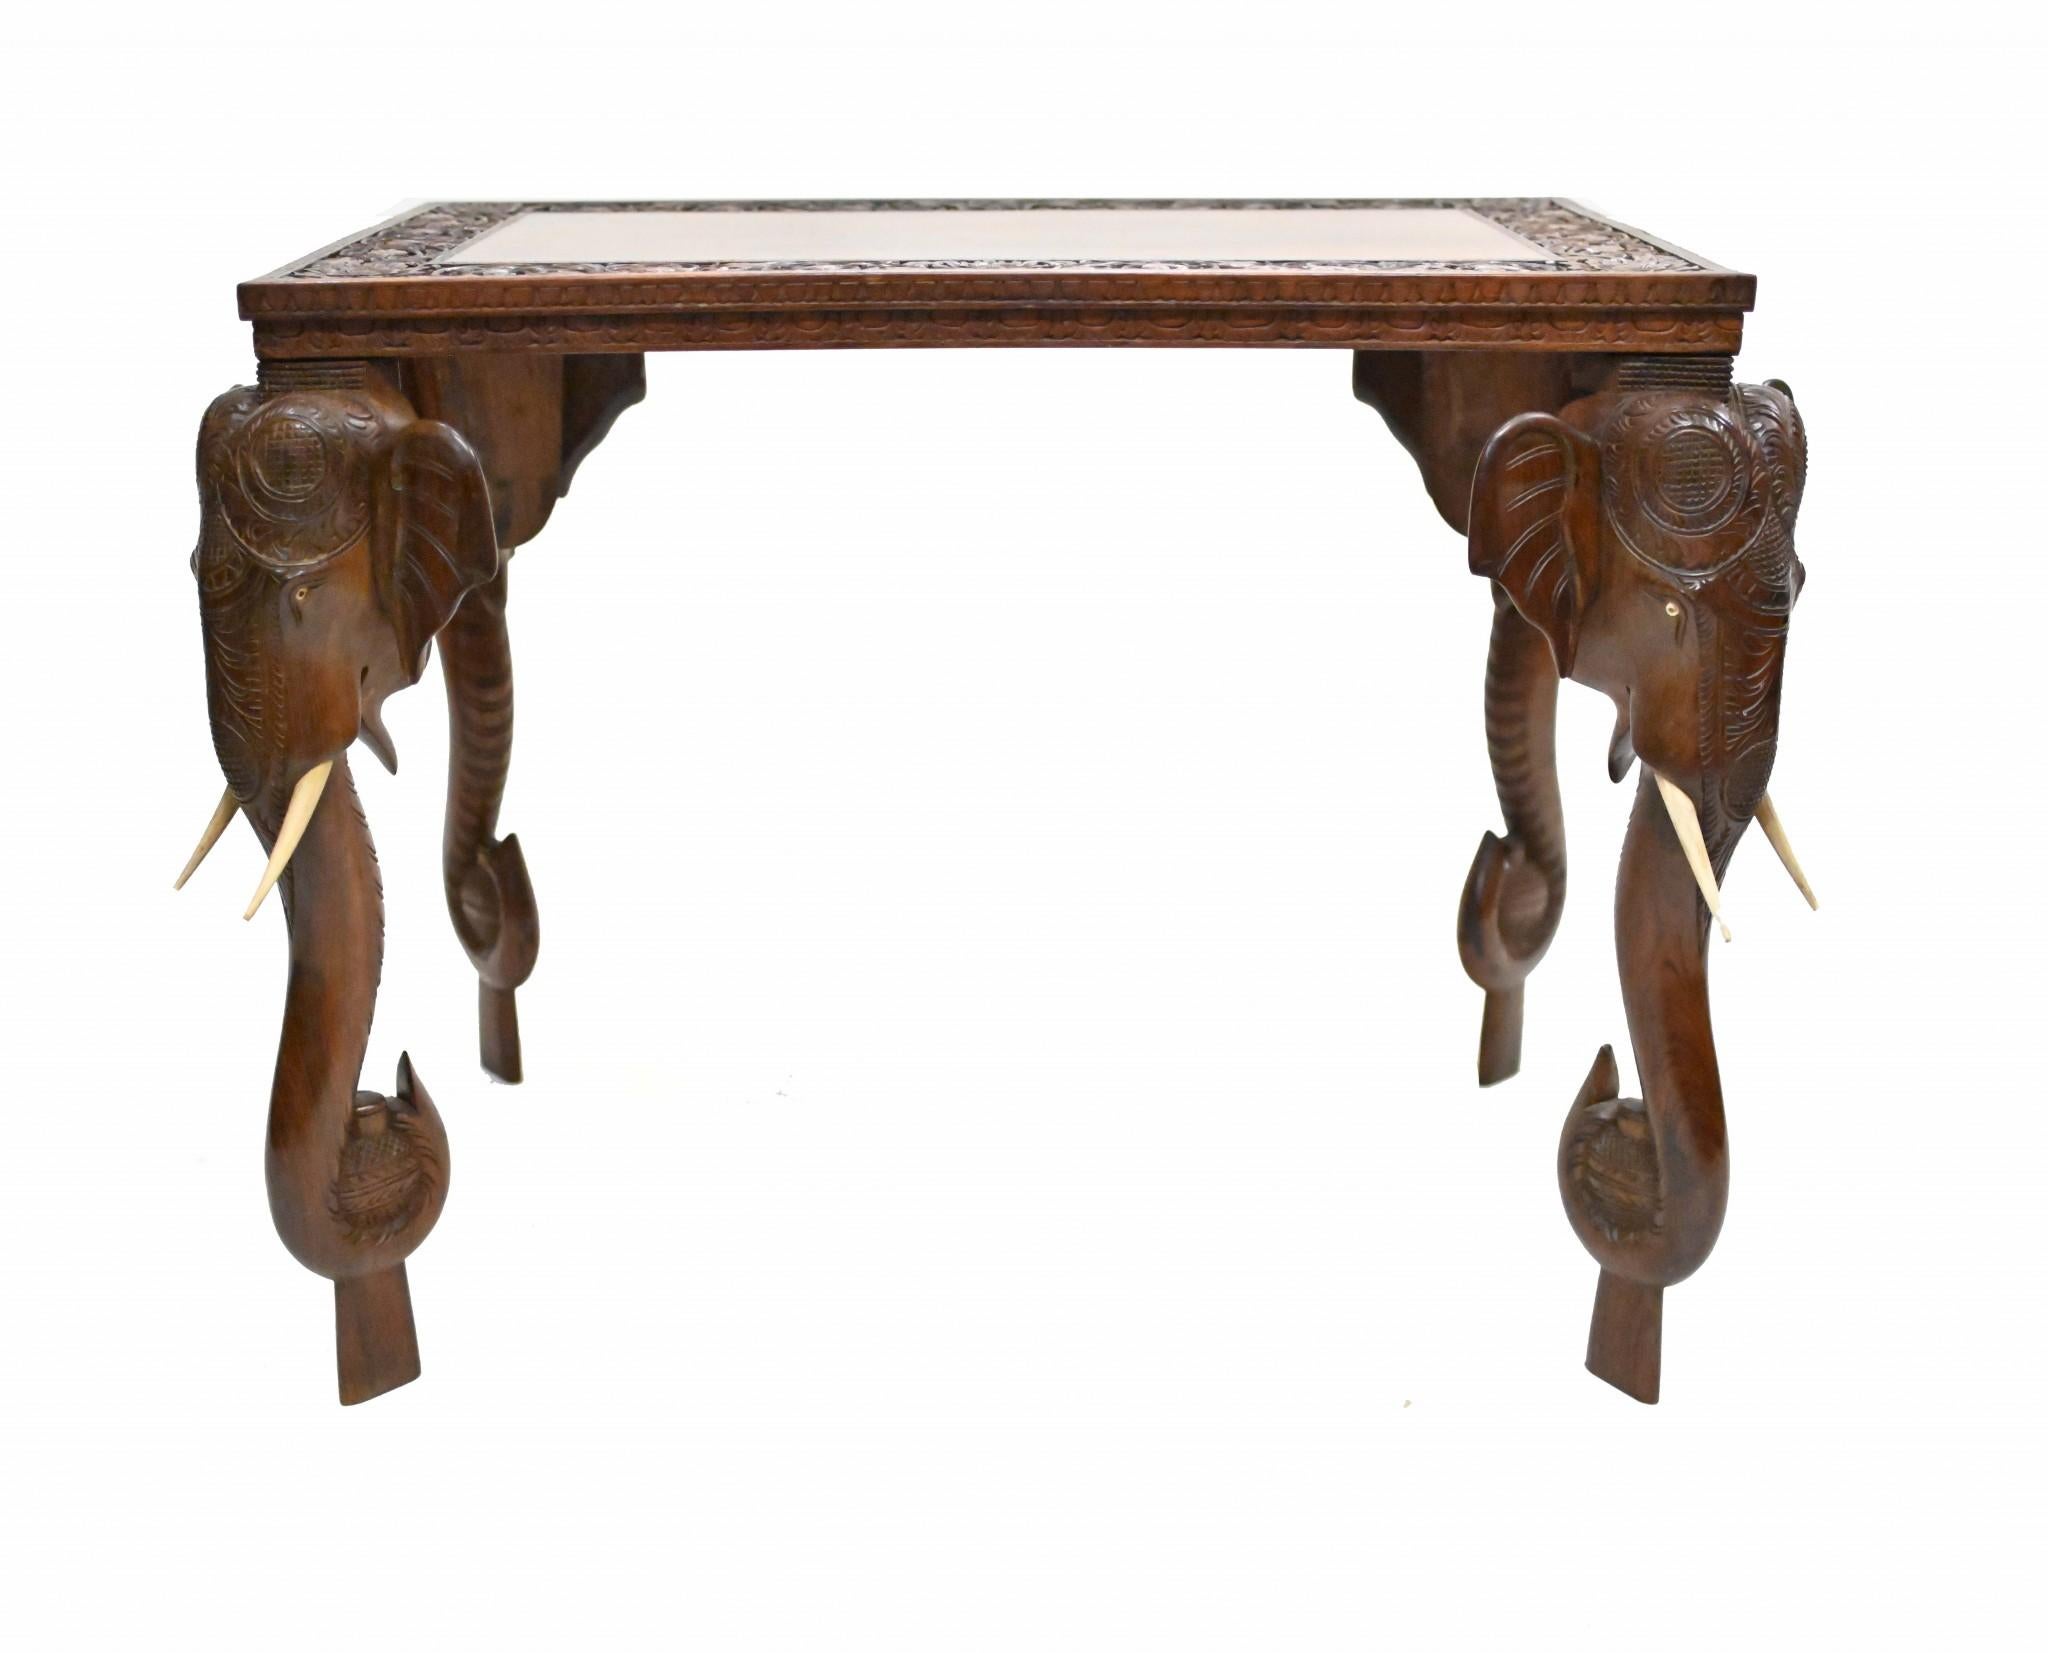 Highly collectable Colonial side table crafted from teak wood
Originally from India - possibly Goan - so great piece of history
Features four elephant heads with trunks for the legs and carved wood for the faux ivory tusks
We date this piece to